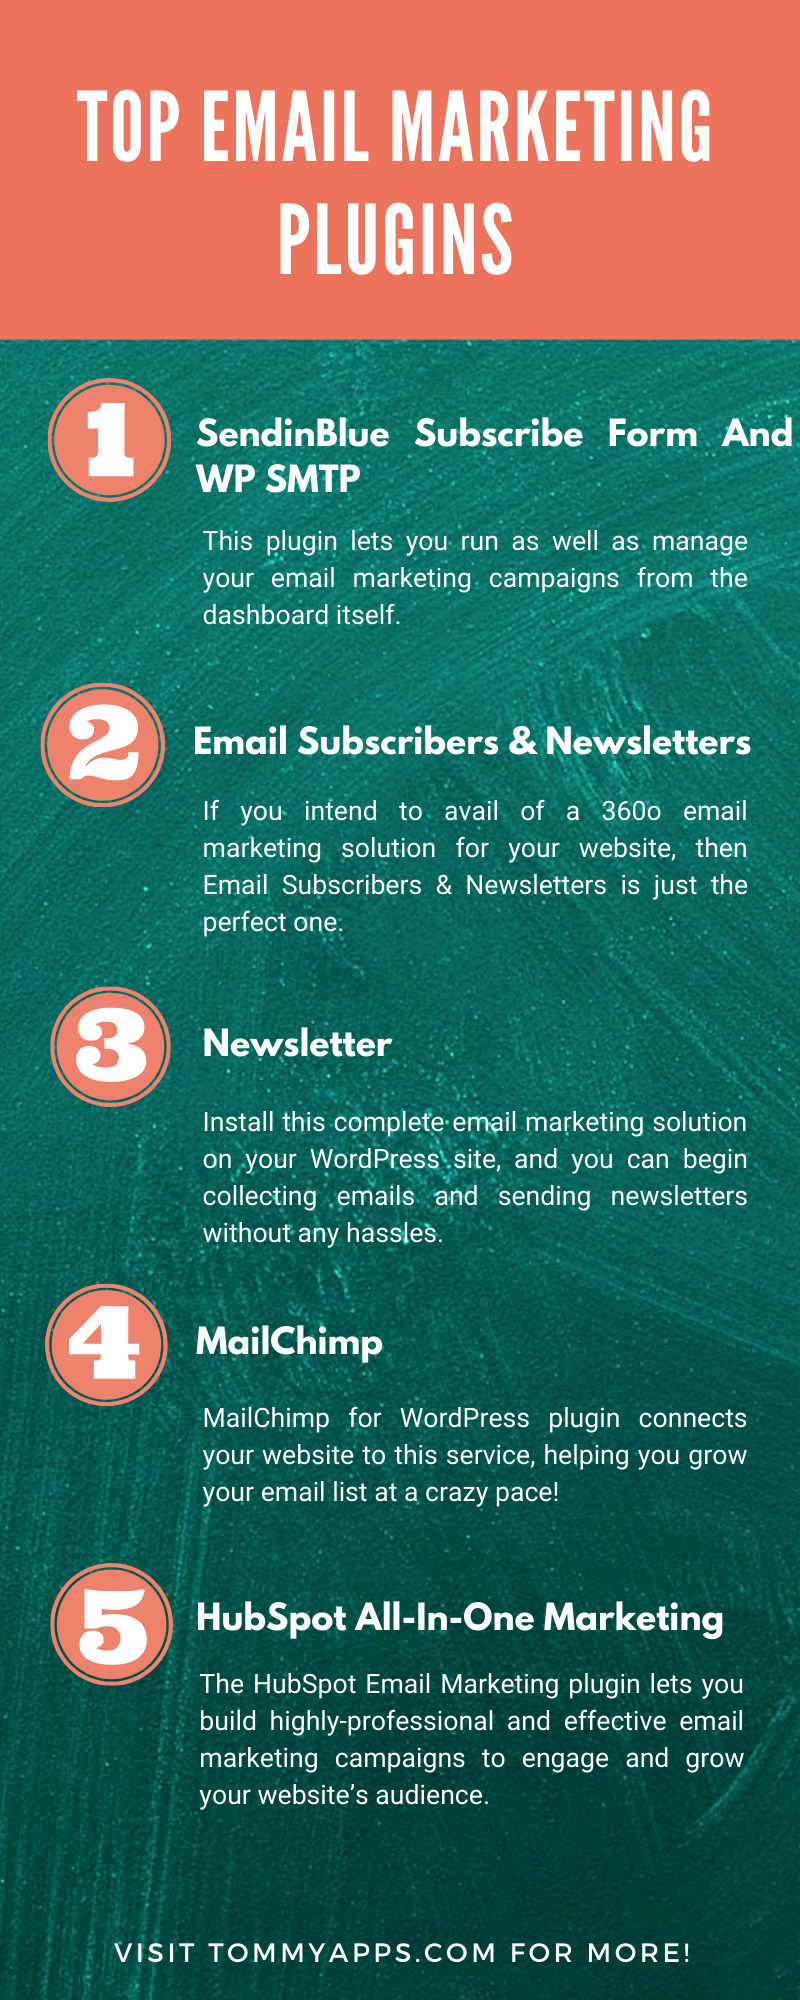 Top Email Marketing Plugins